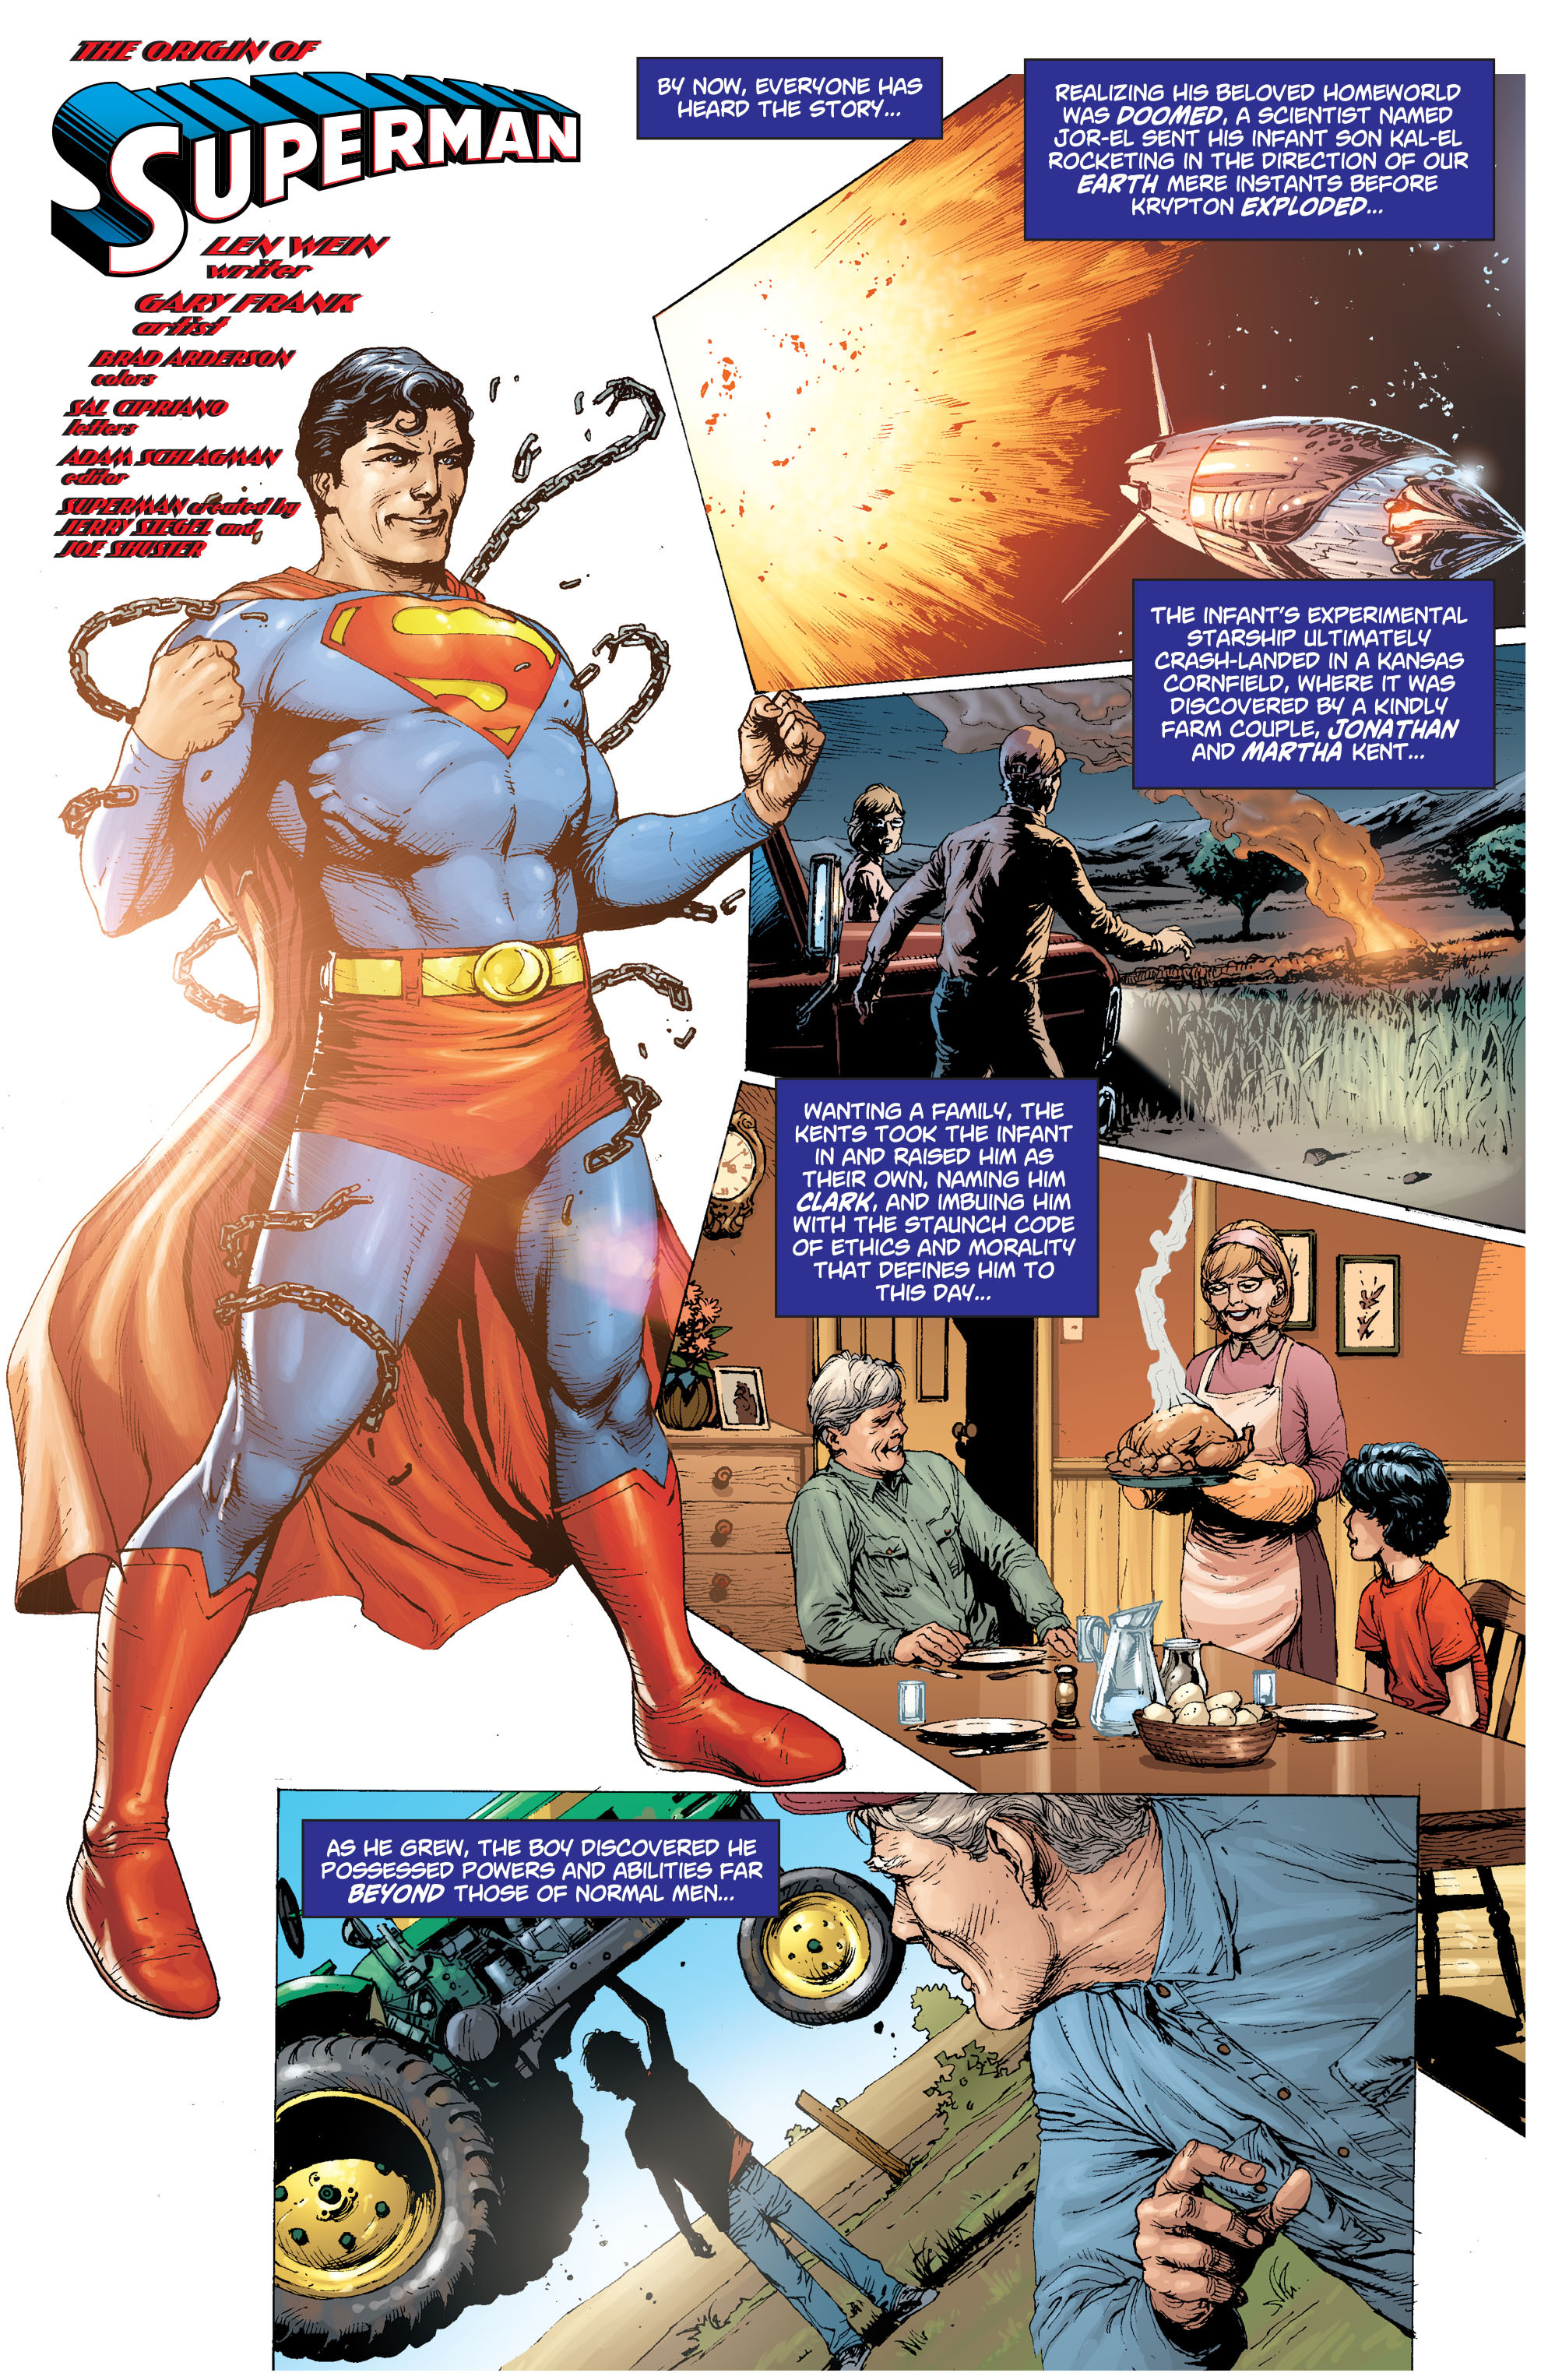 Read online Superman (2011) comic -  Issue # _Special - Superman 201 - 4